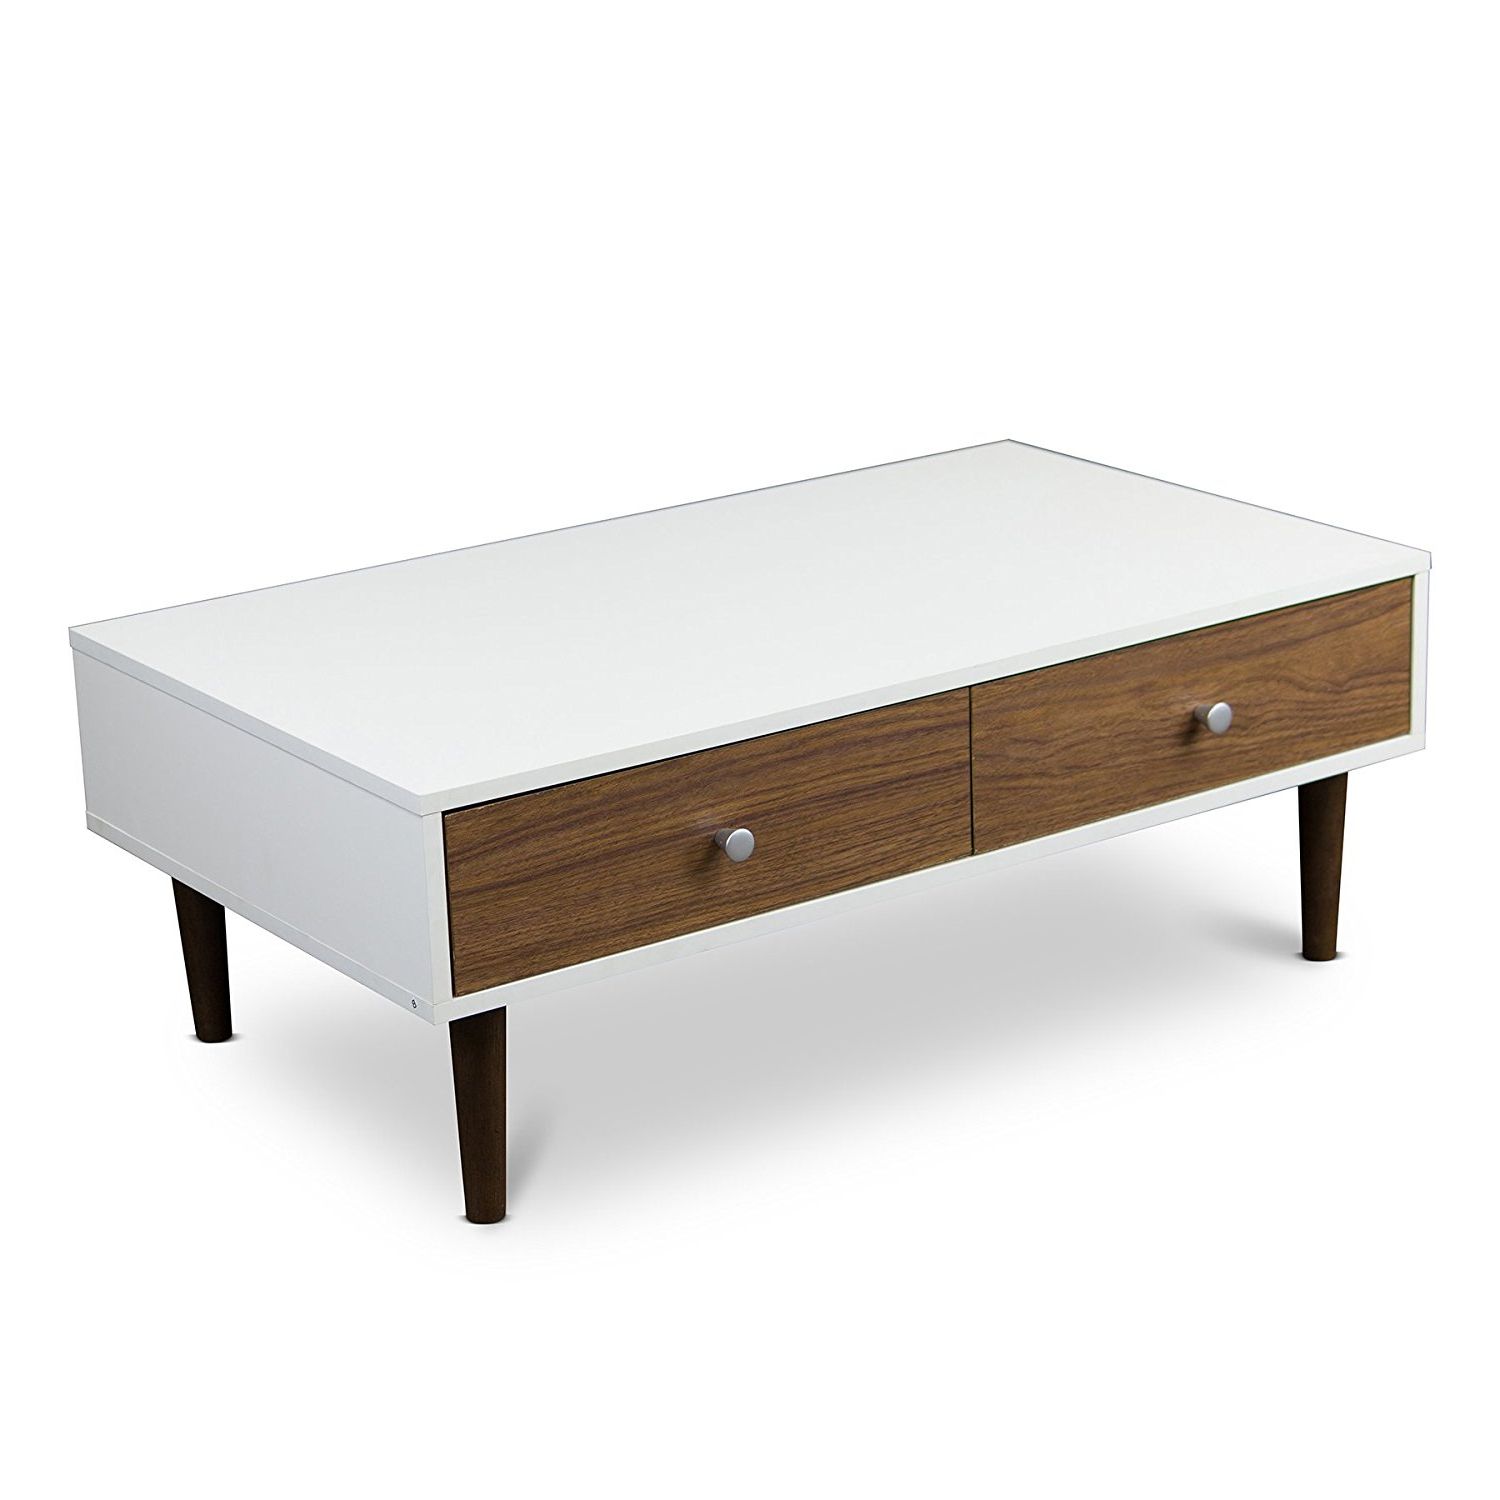 Trendy Latest Design White High Gloss Mdf Storage Coffee Table For Sale For Stack Hi Gloss Wood Coffee Tables (View 10 of 20)